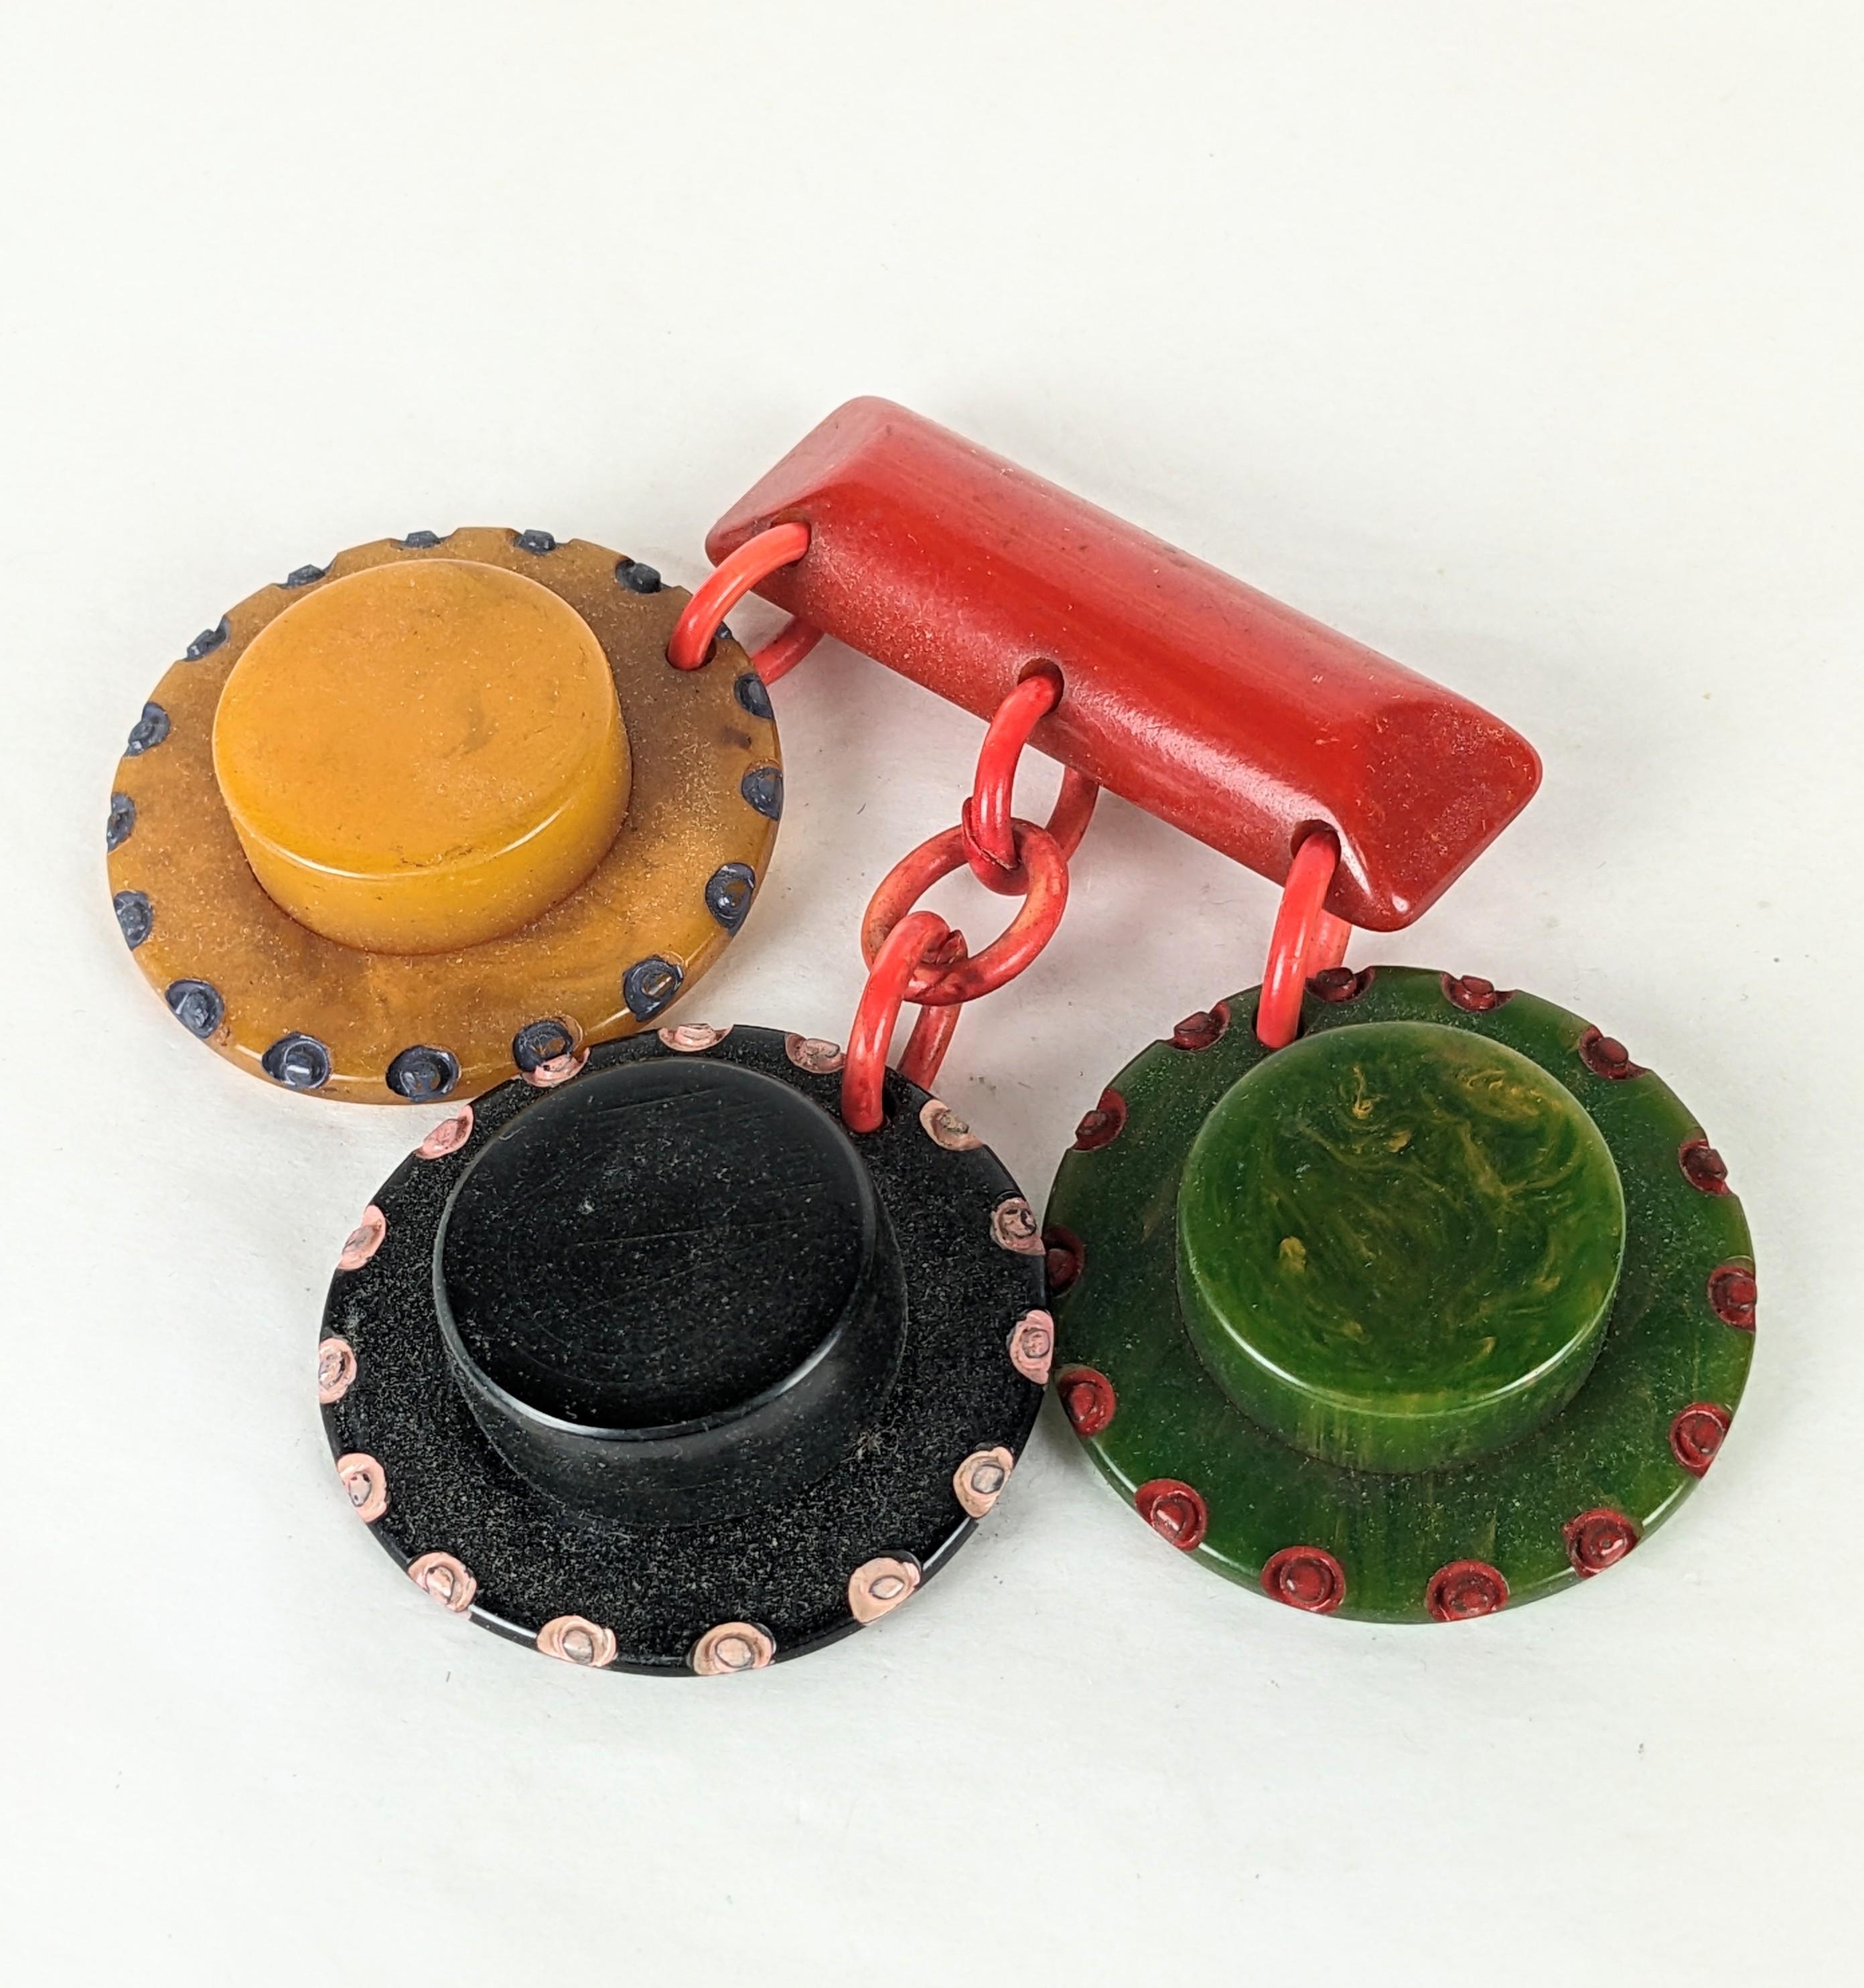 Charming Art Deco Bakelite Brooch of brightly colored carved and painted sombreros dangling from a central red bakelite bar pin. Hat is mango, black and marbled green bakelite.
1930's Collectible US Folk Art. 3.25